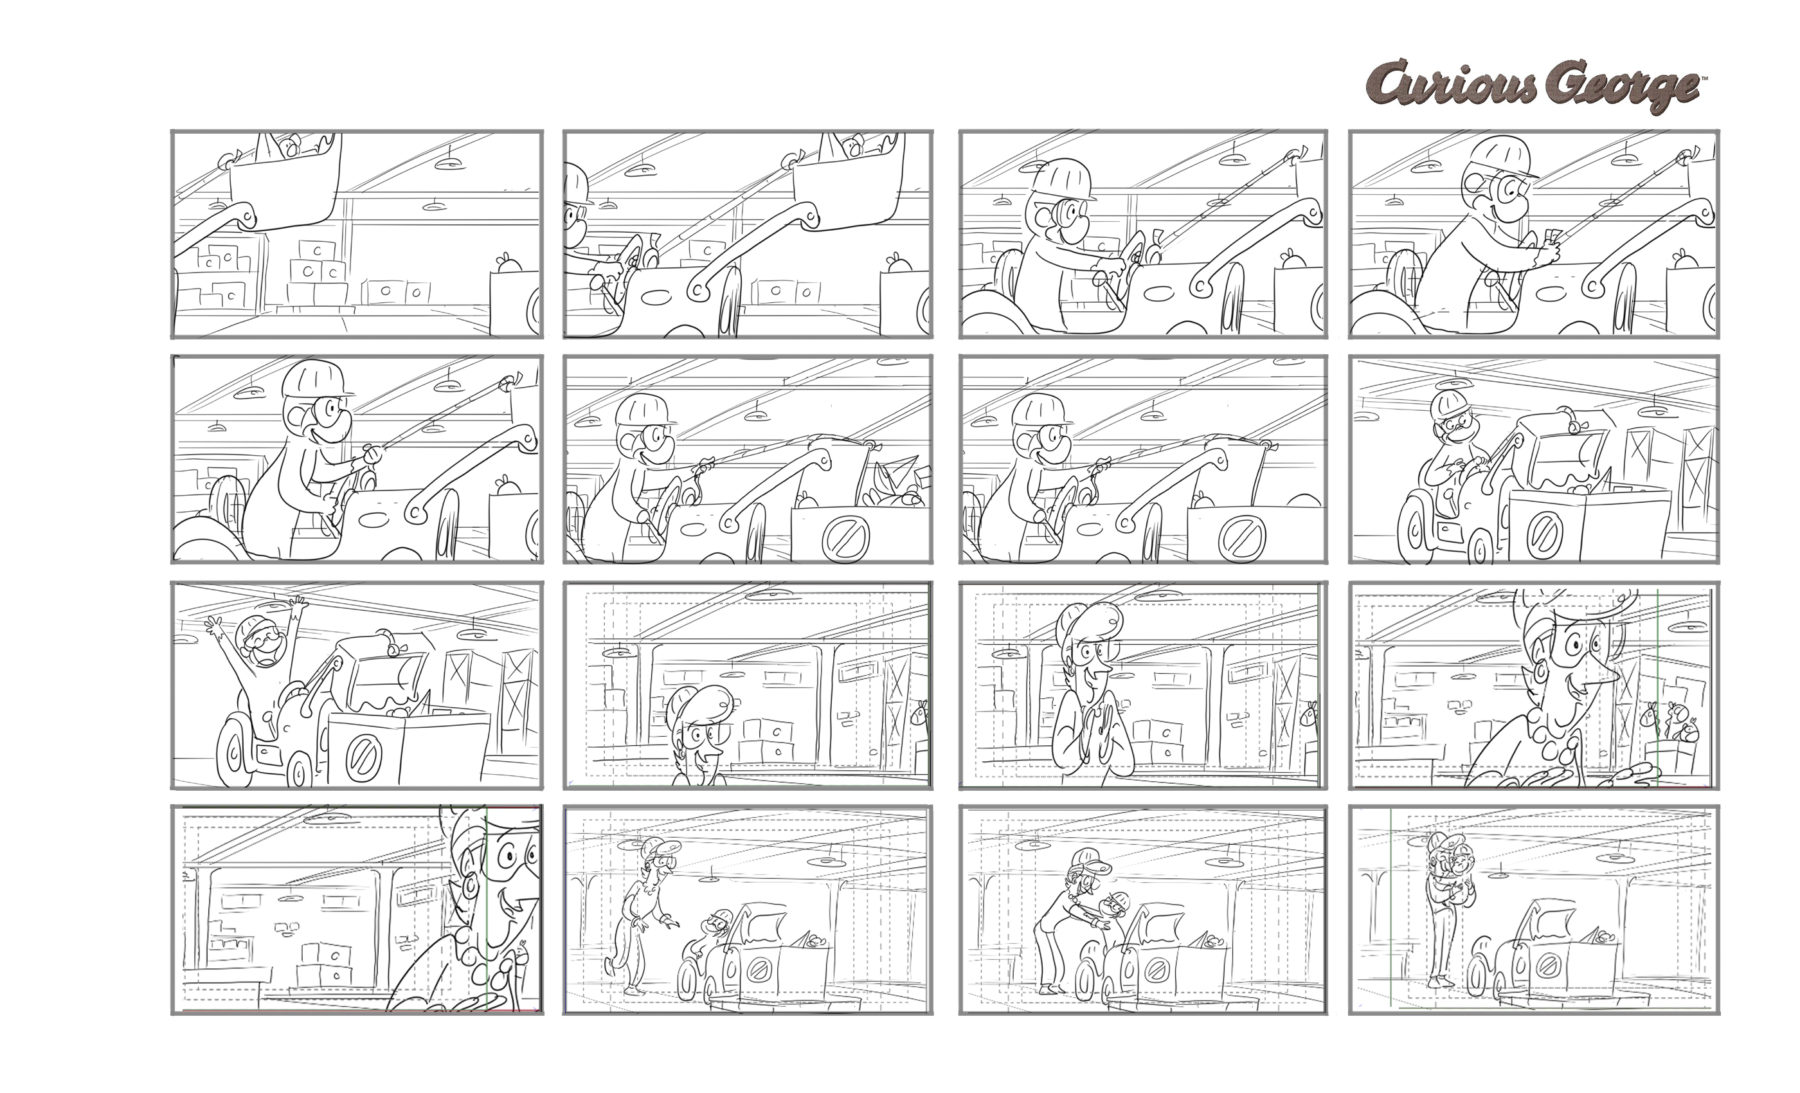 Storyboards by Bert Ring for the Curious George TV Special, Toy Monkey, Featuring Carol Burnett for Universal Animation Studios